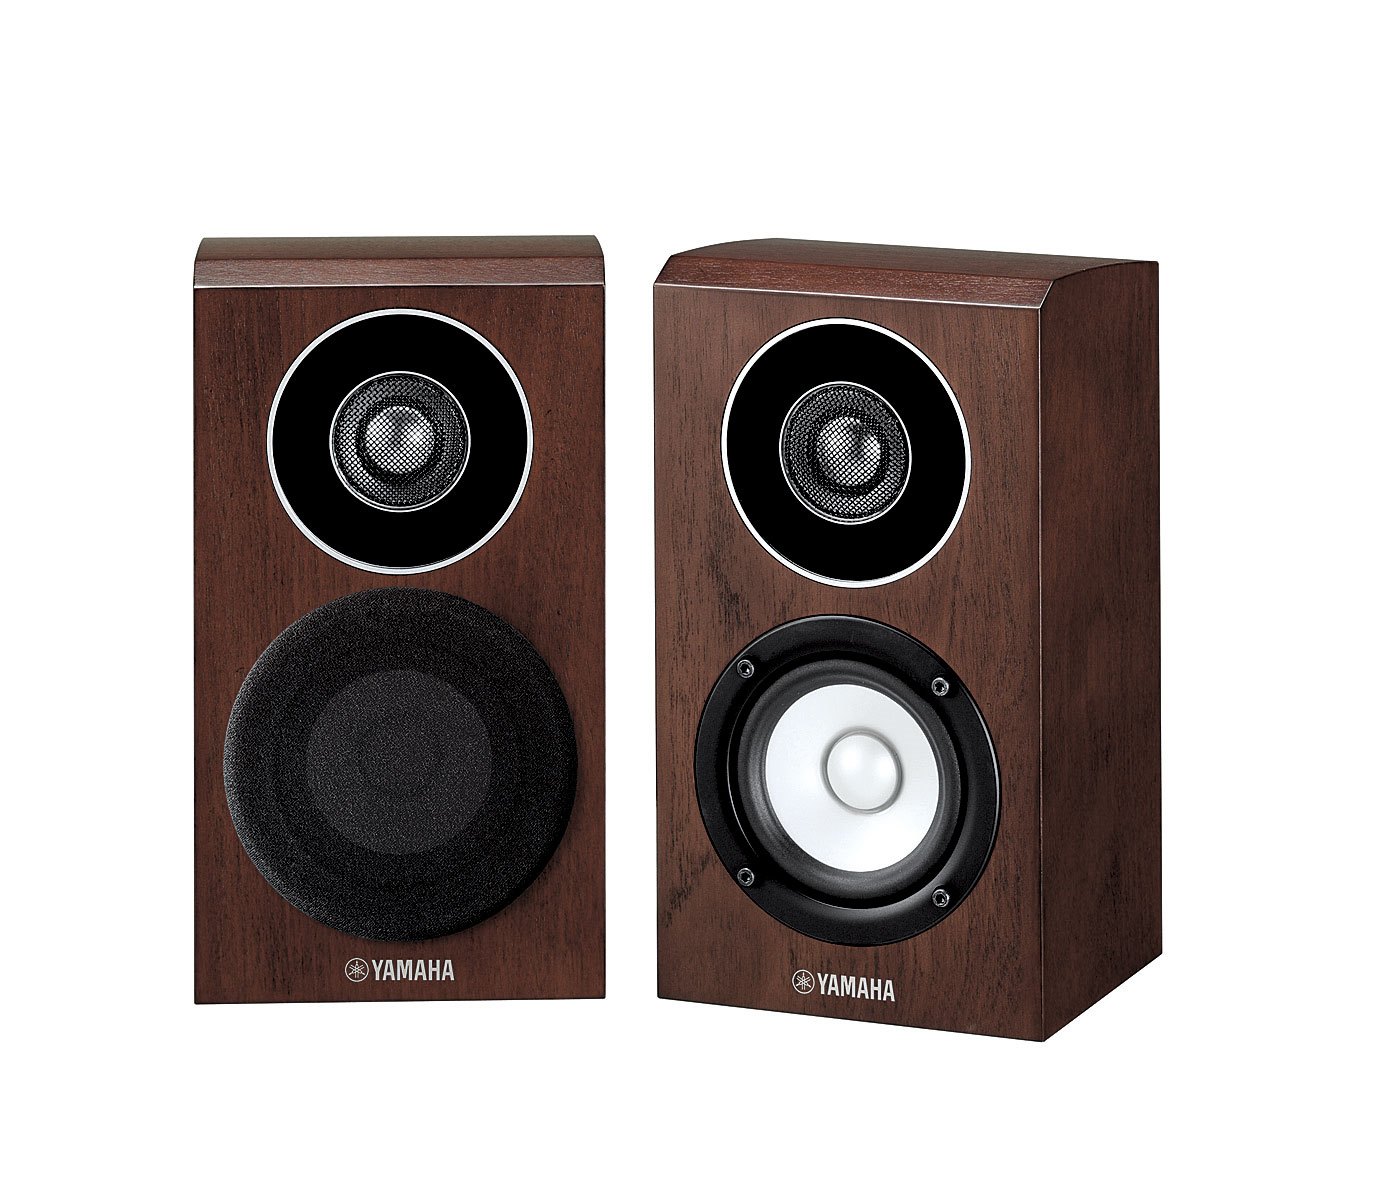 NS-B700 - Overview - Speaker Systems - Audio & Visual - Products